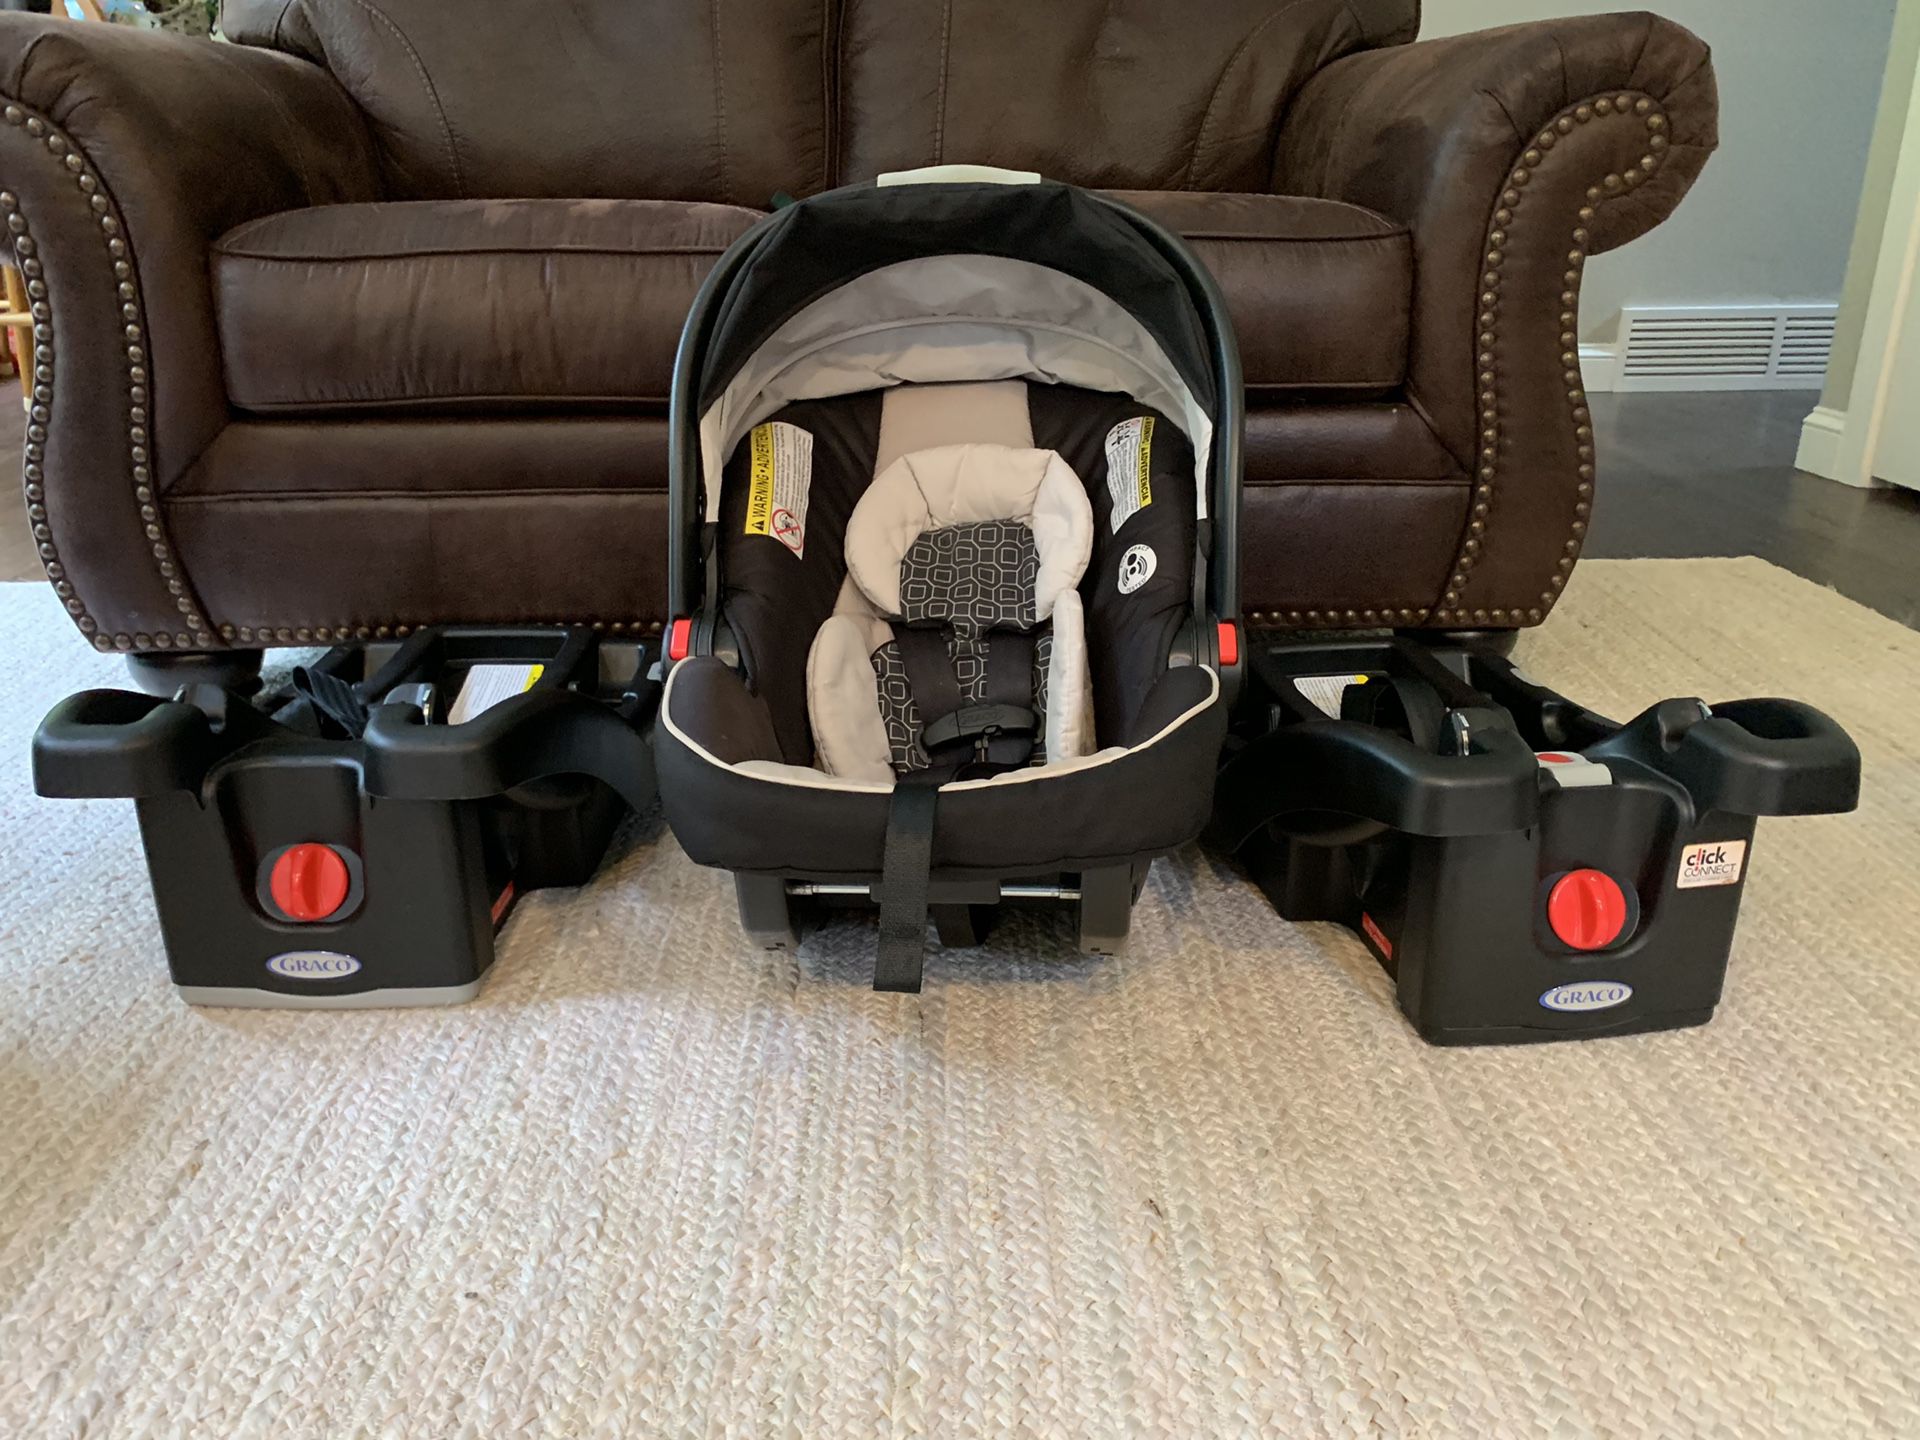 Graco Fast Action Fold Sport Travel System with Click Connect Snugride 35 car seat with two bases, color Pierce